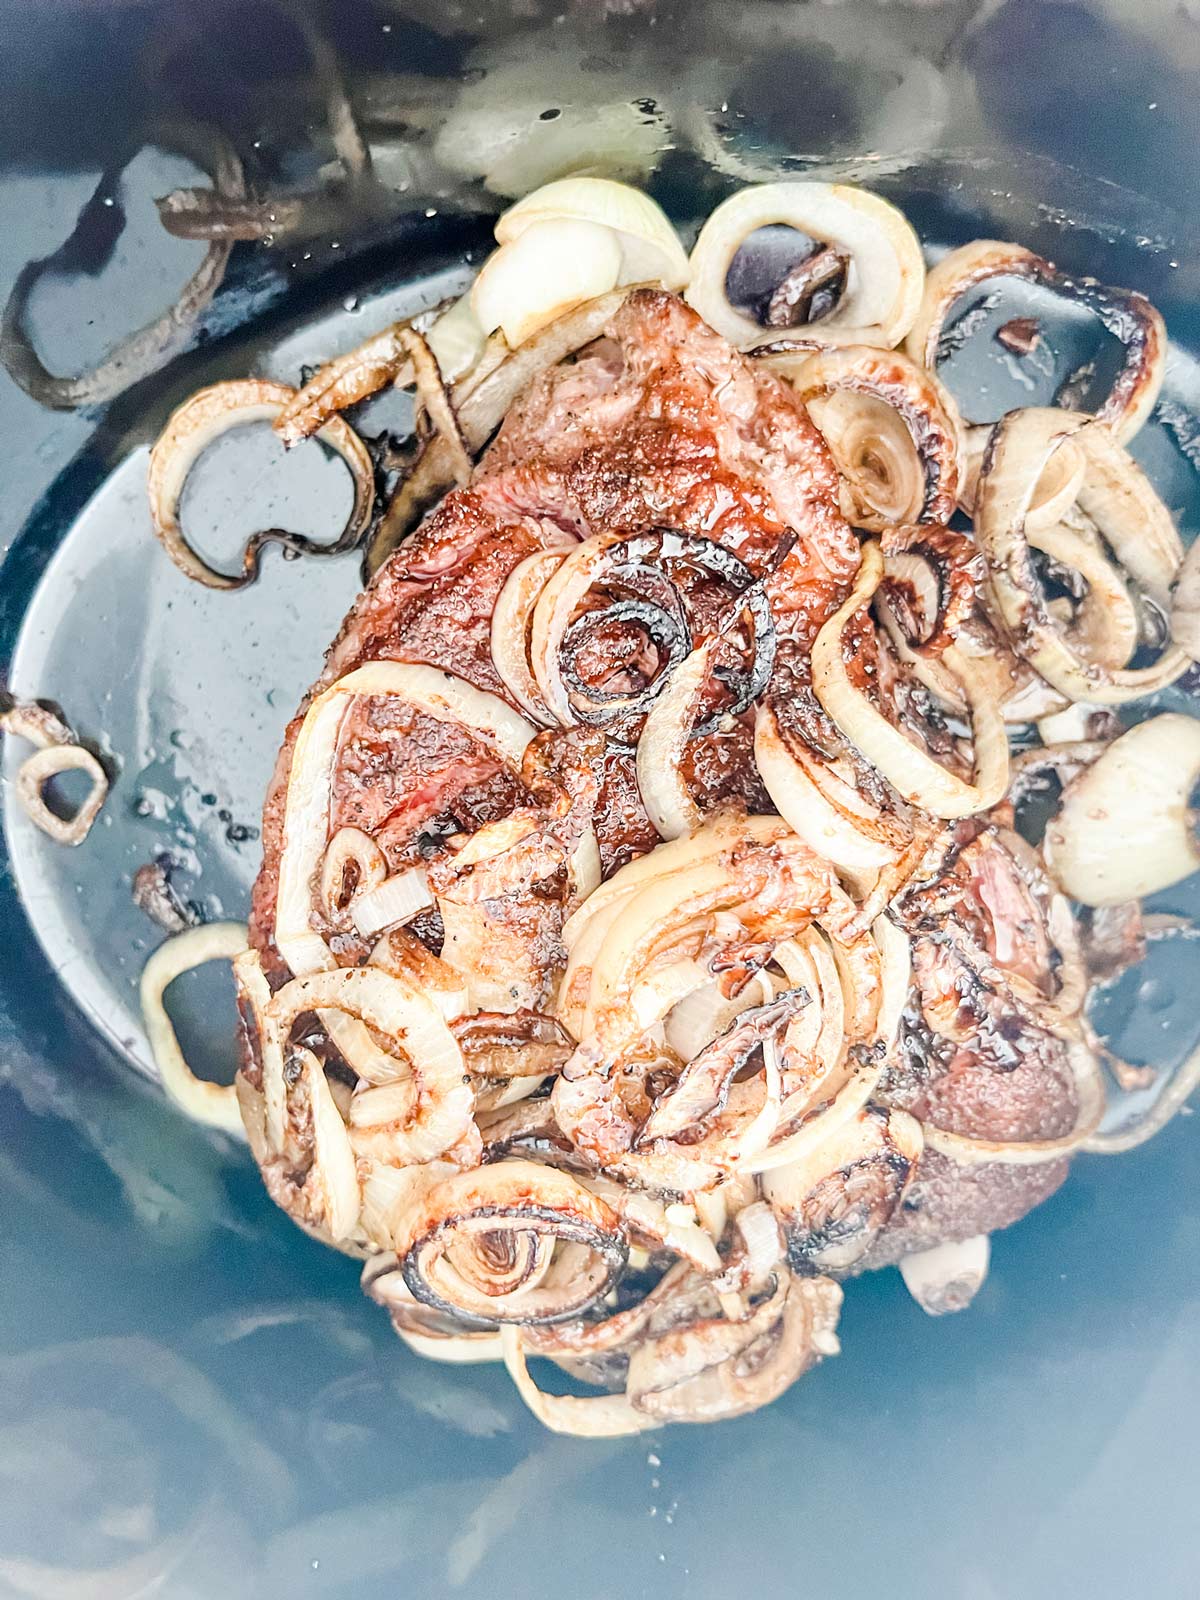 Overhead photo of a slow cooker with a seared roast and onions in it.